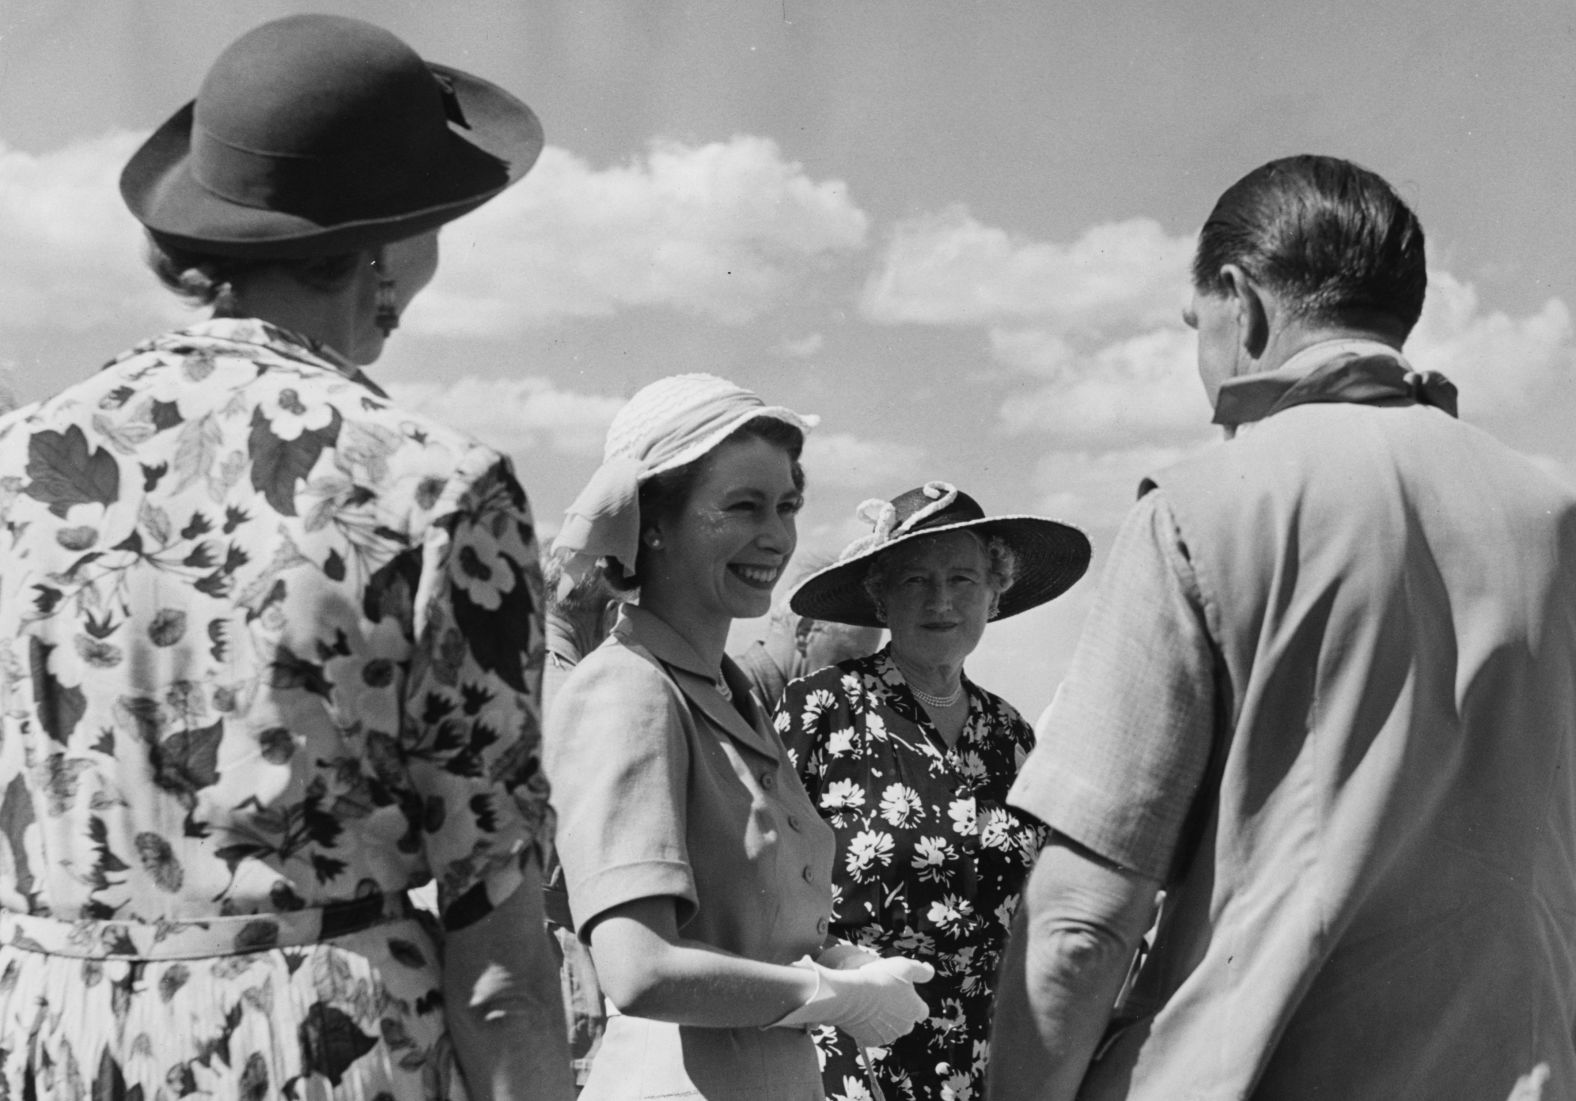 During her royal tour, Princess Elizabeth attends a polo match in Nyeri, Kenya, on February 3, 1952.